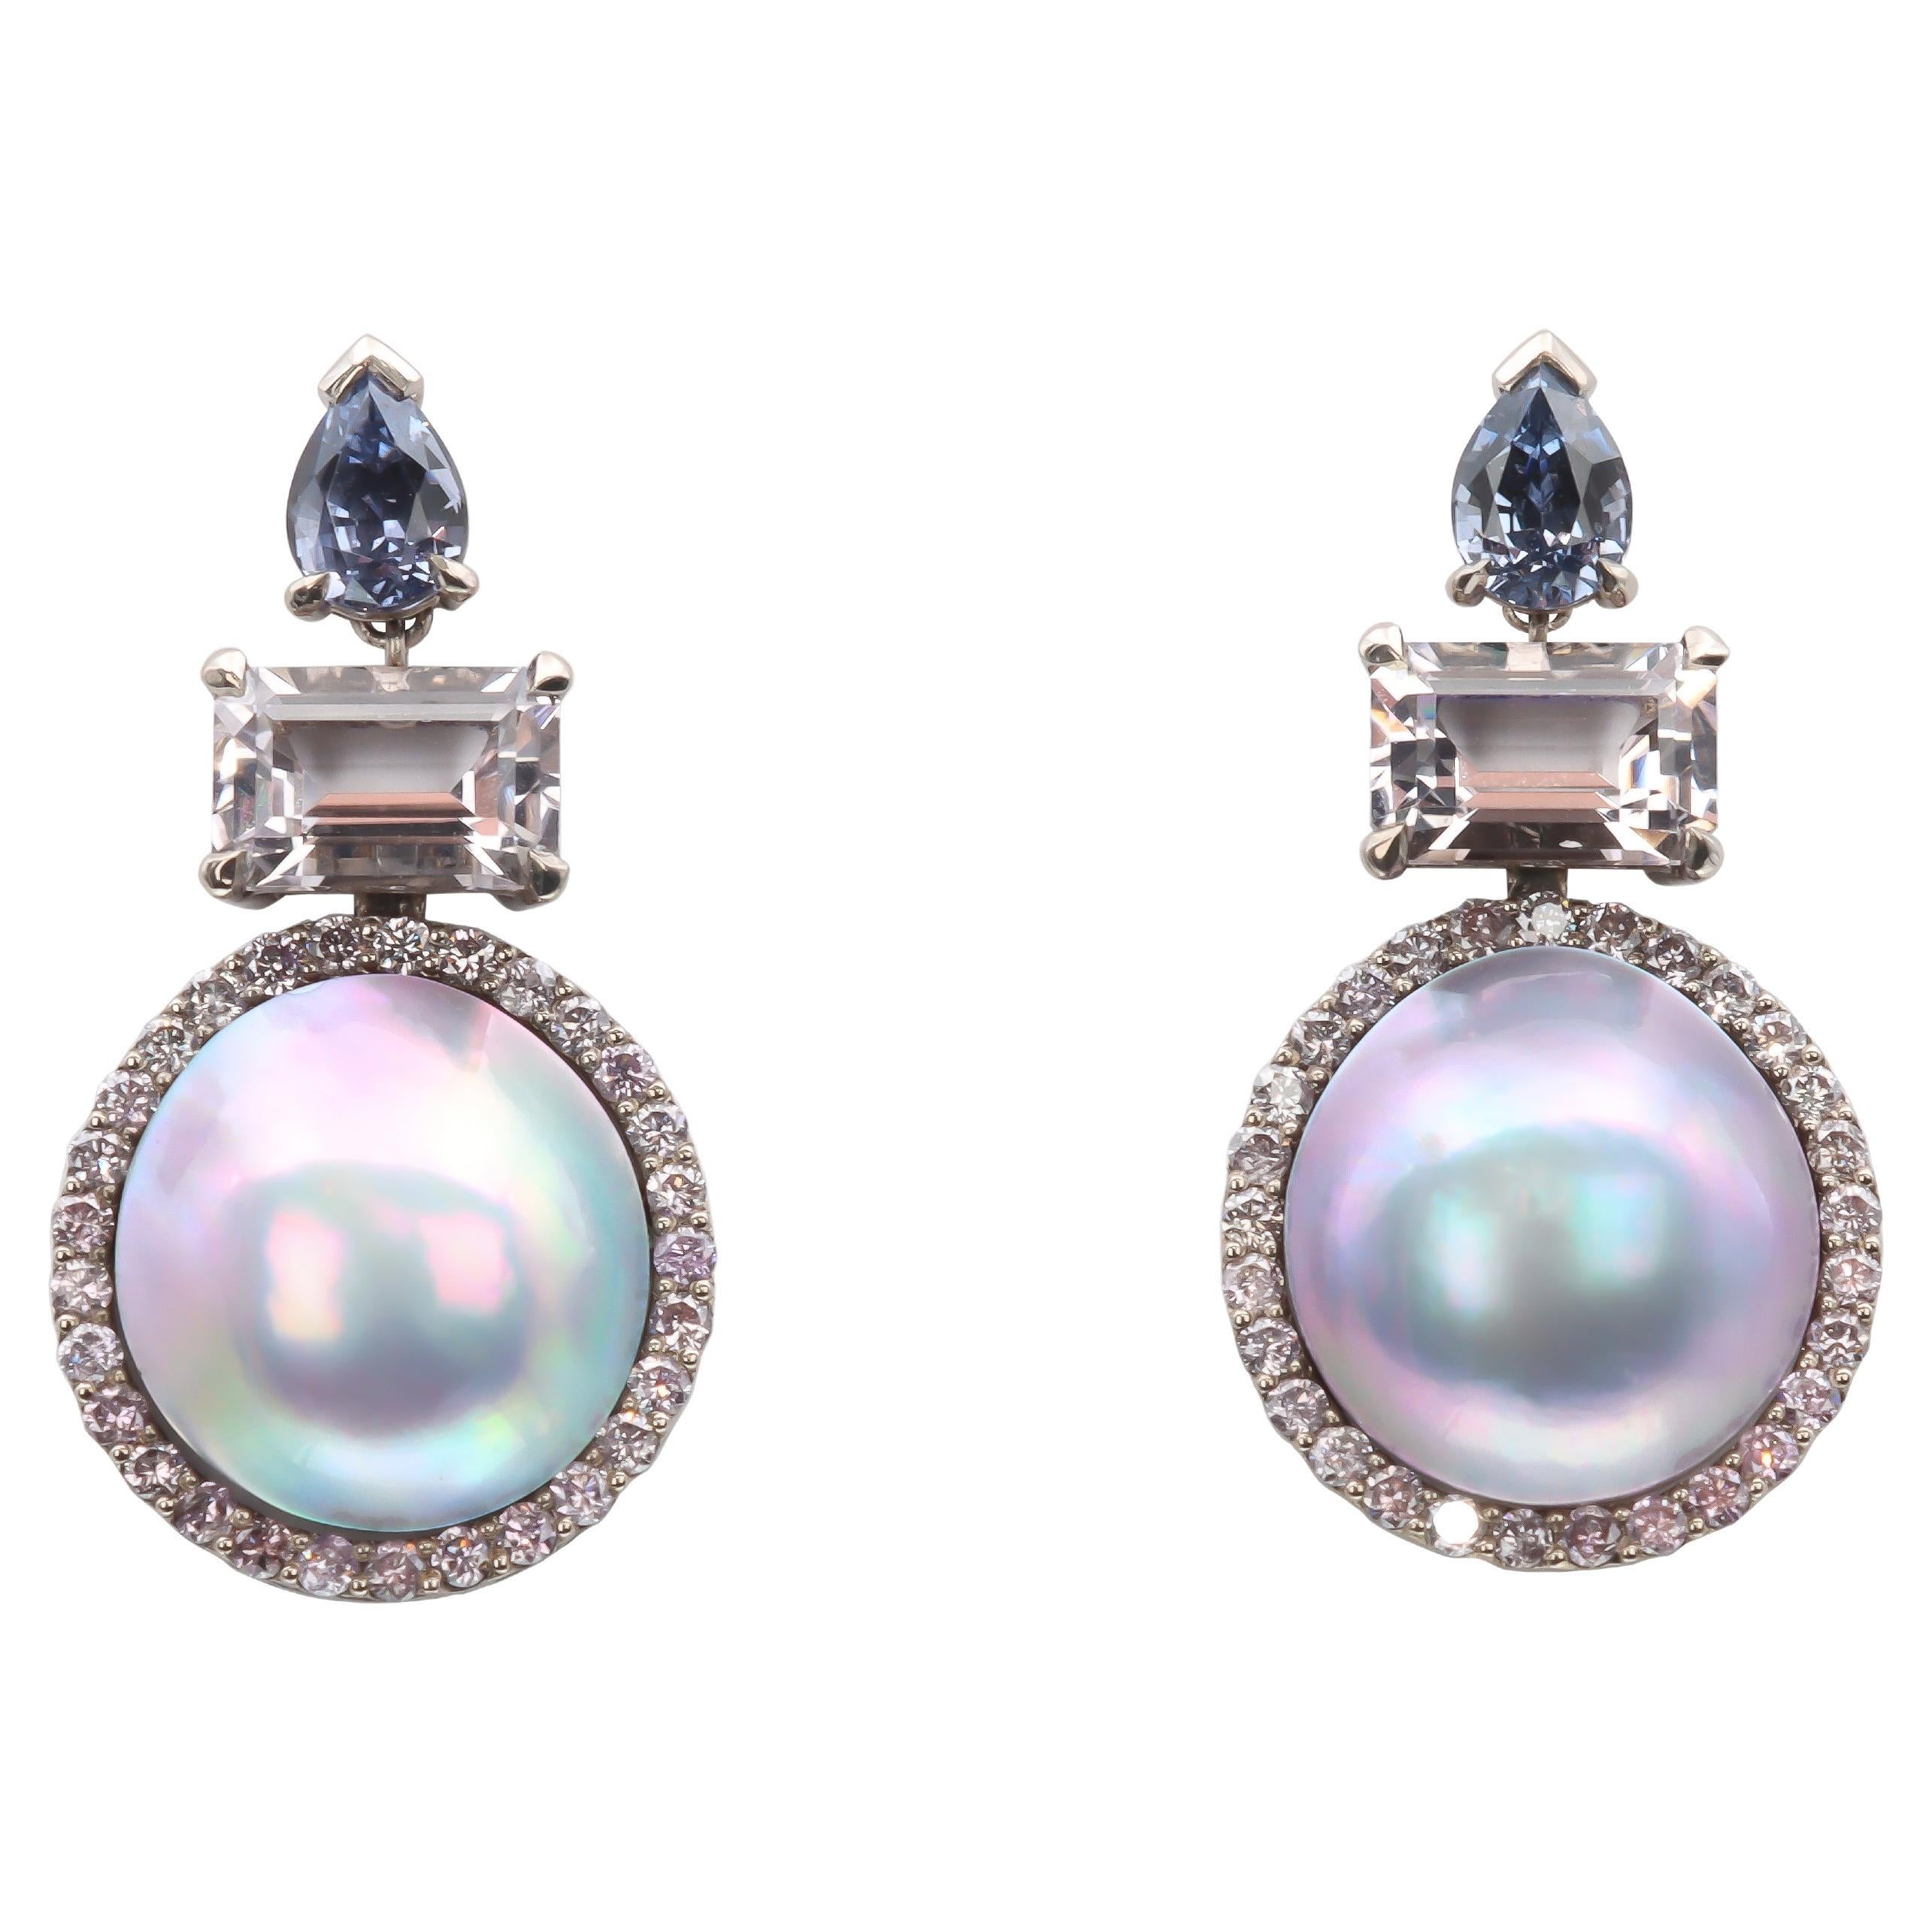 These one-of-a-kind earrings by Aventina-Spencer featuring Ultra Rare 13mm Cortez Mabé Pearls, 58 Round Brilliant cut Natural Fancy Colour Lilac Diamonds with VS clarity and a total weight of 0.88 carats, Madagascan Pear shaped Lilac Spinels